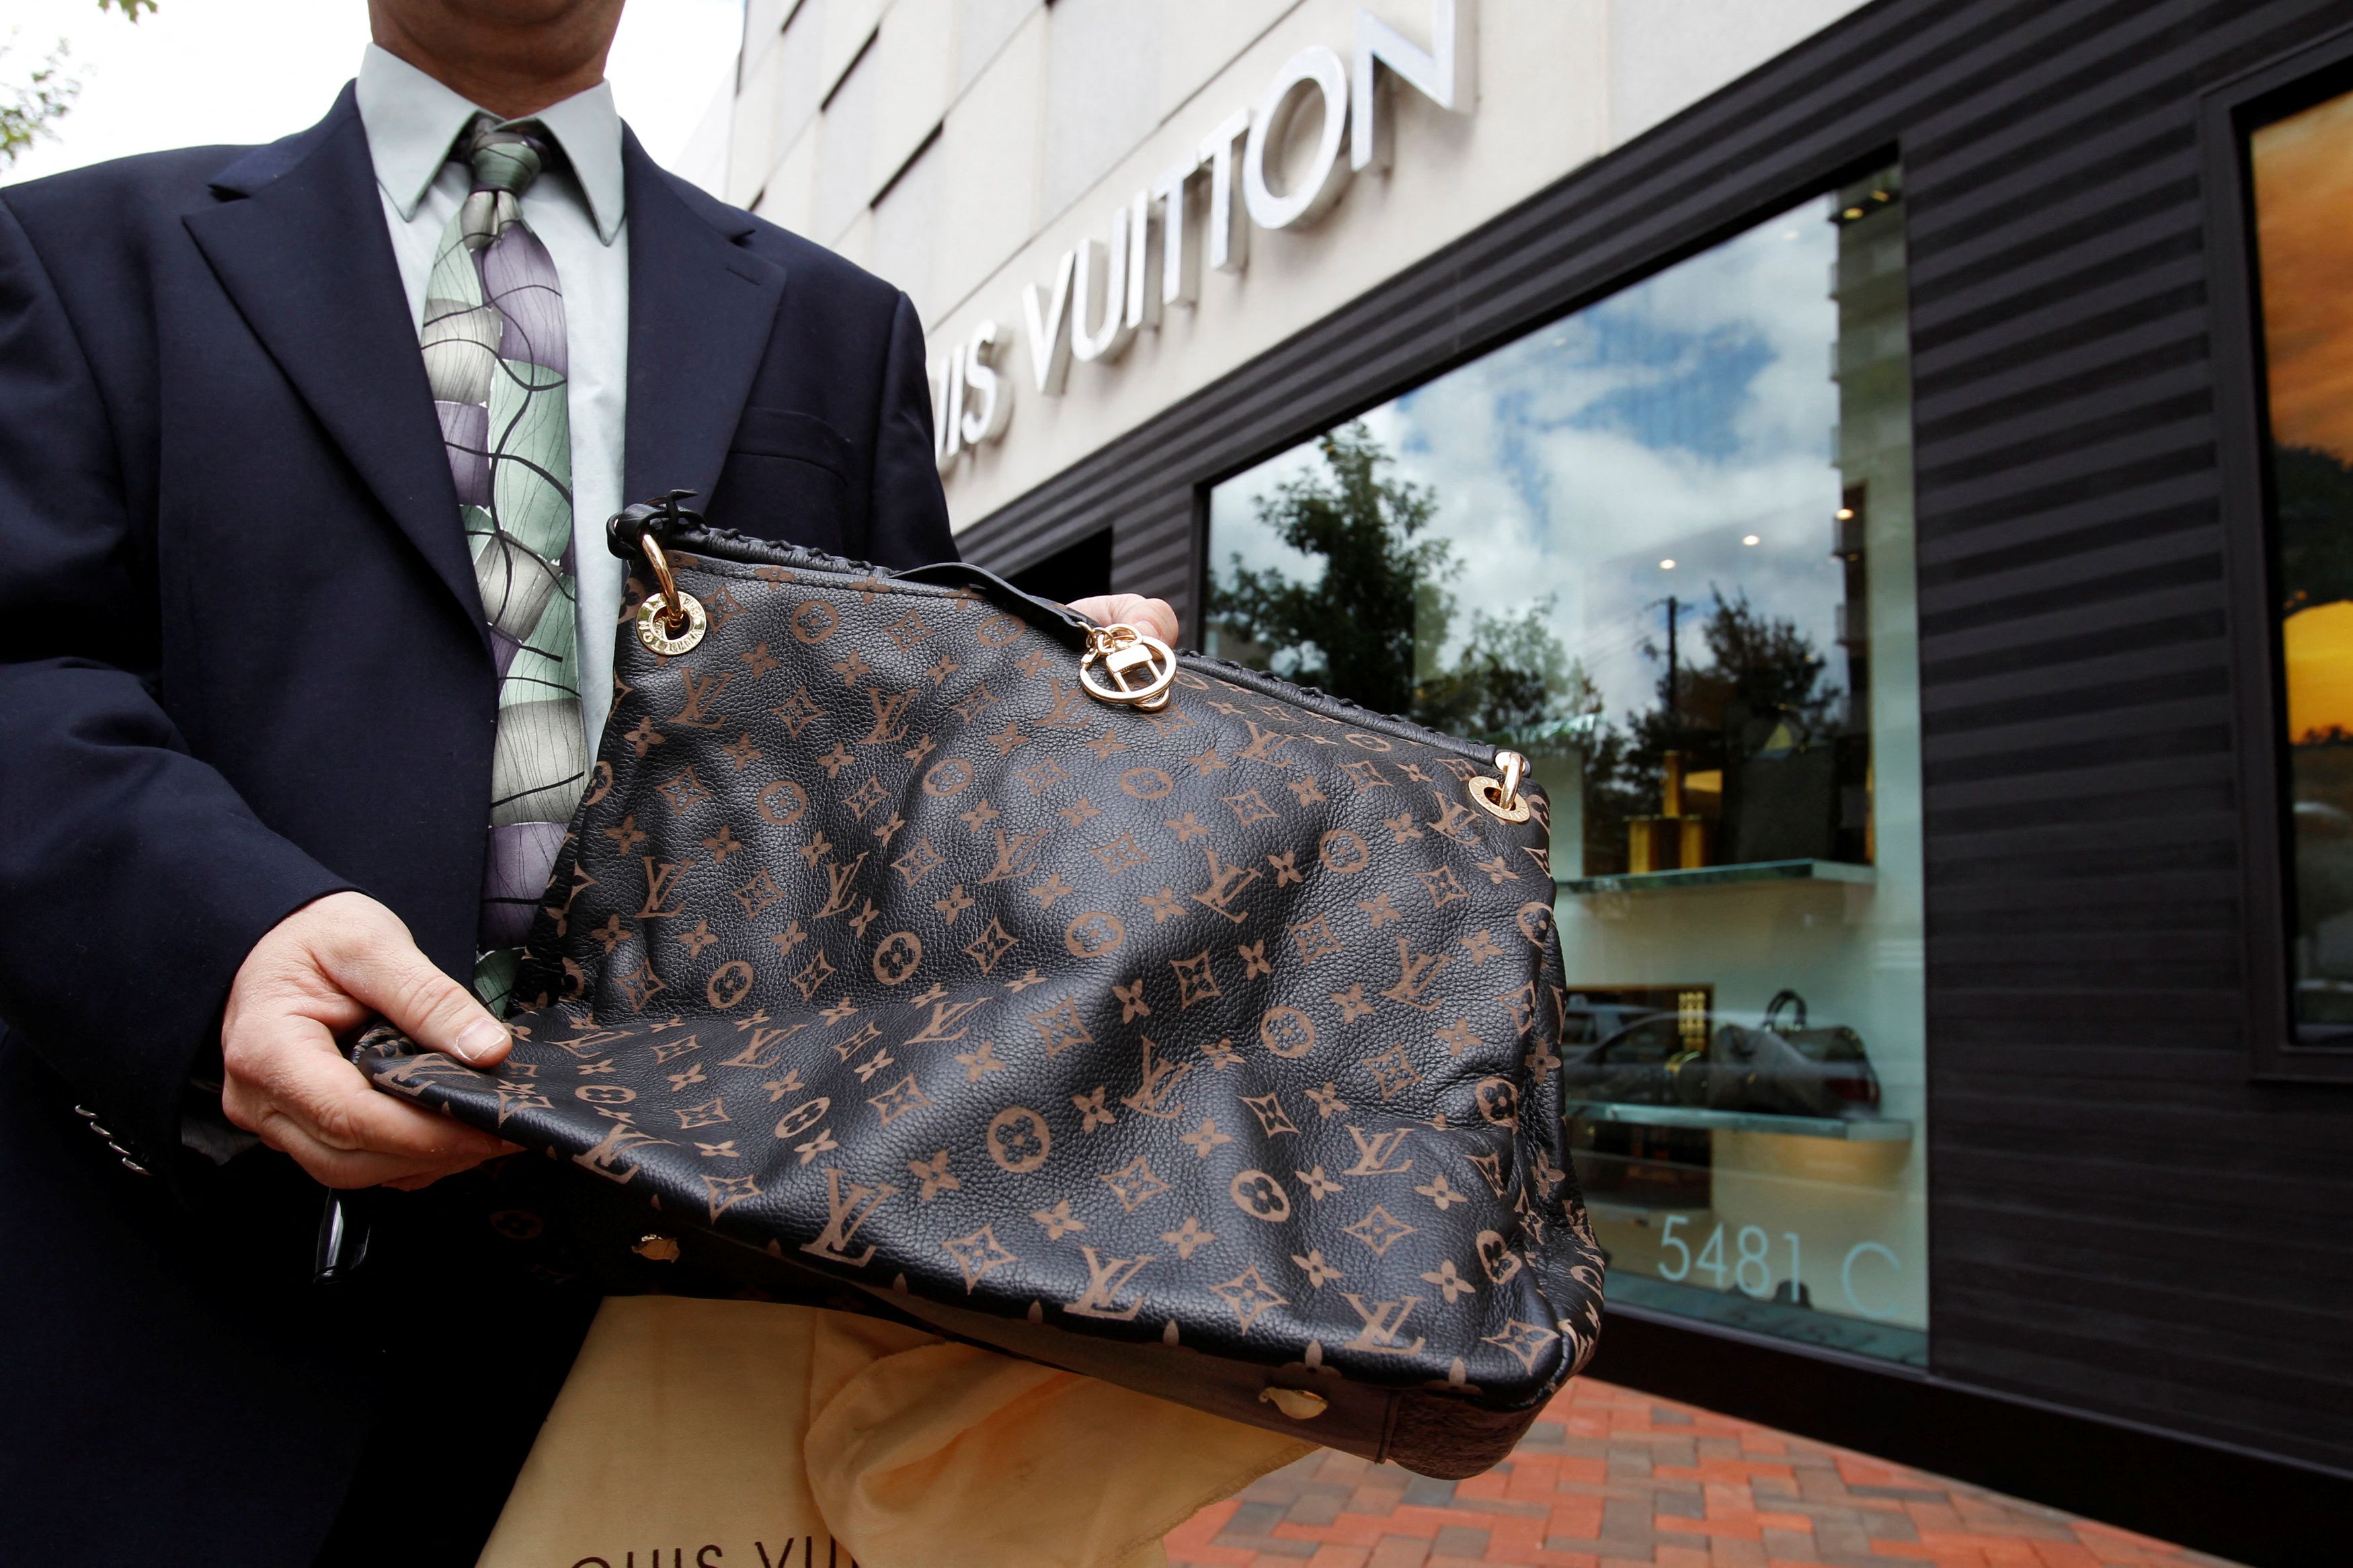 composiet Anesthesie Glad Facebook, Instagram are hot spots for fake Louis Vuitton, Gucci and Chanel  | Reuters